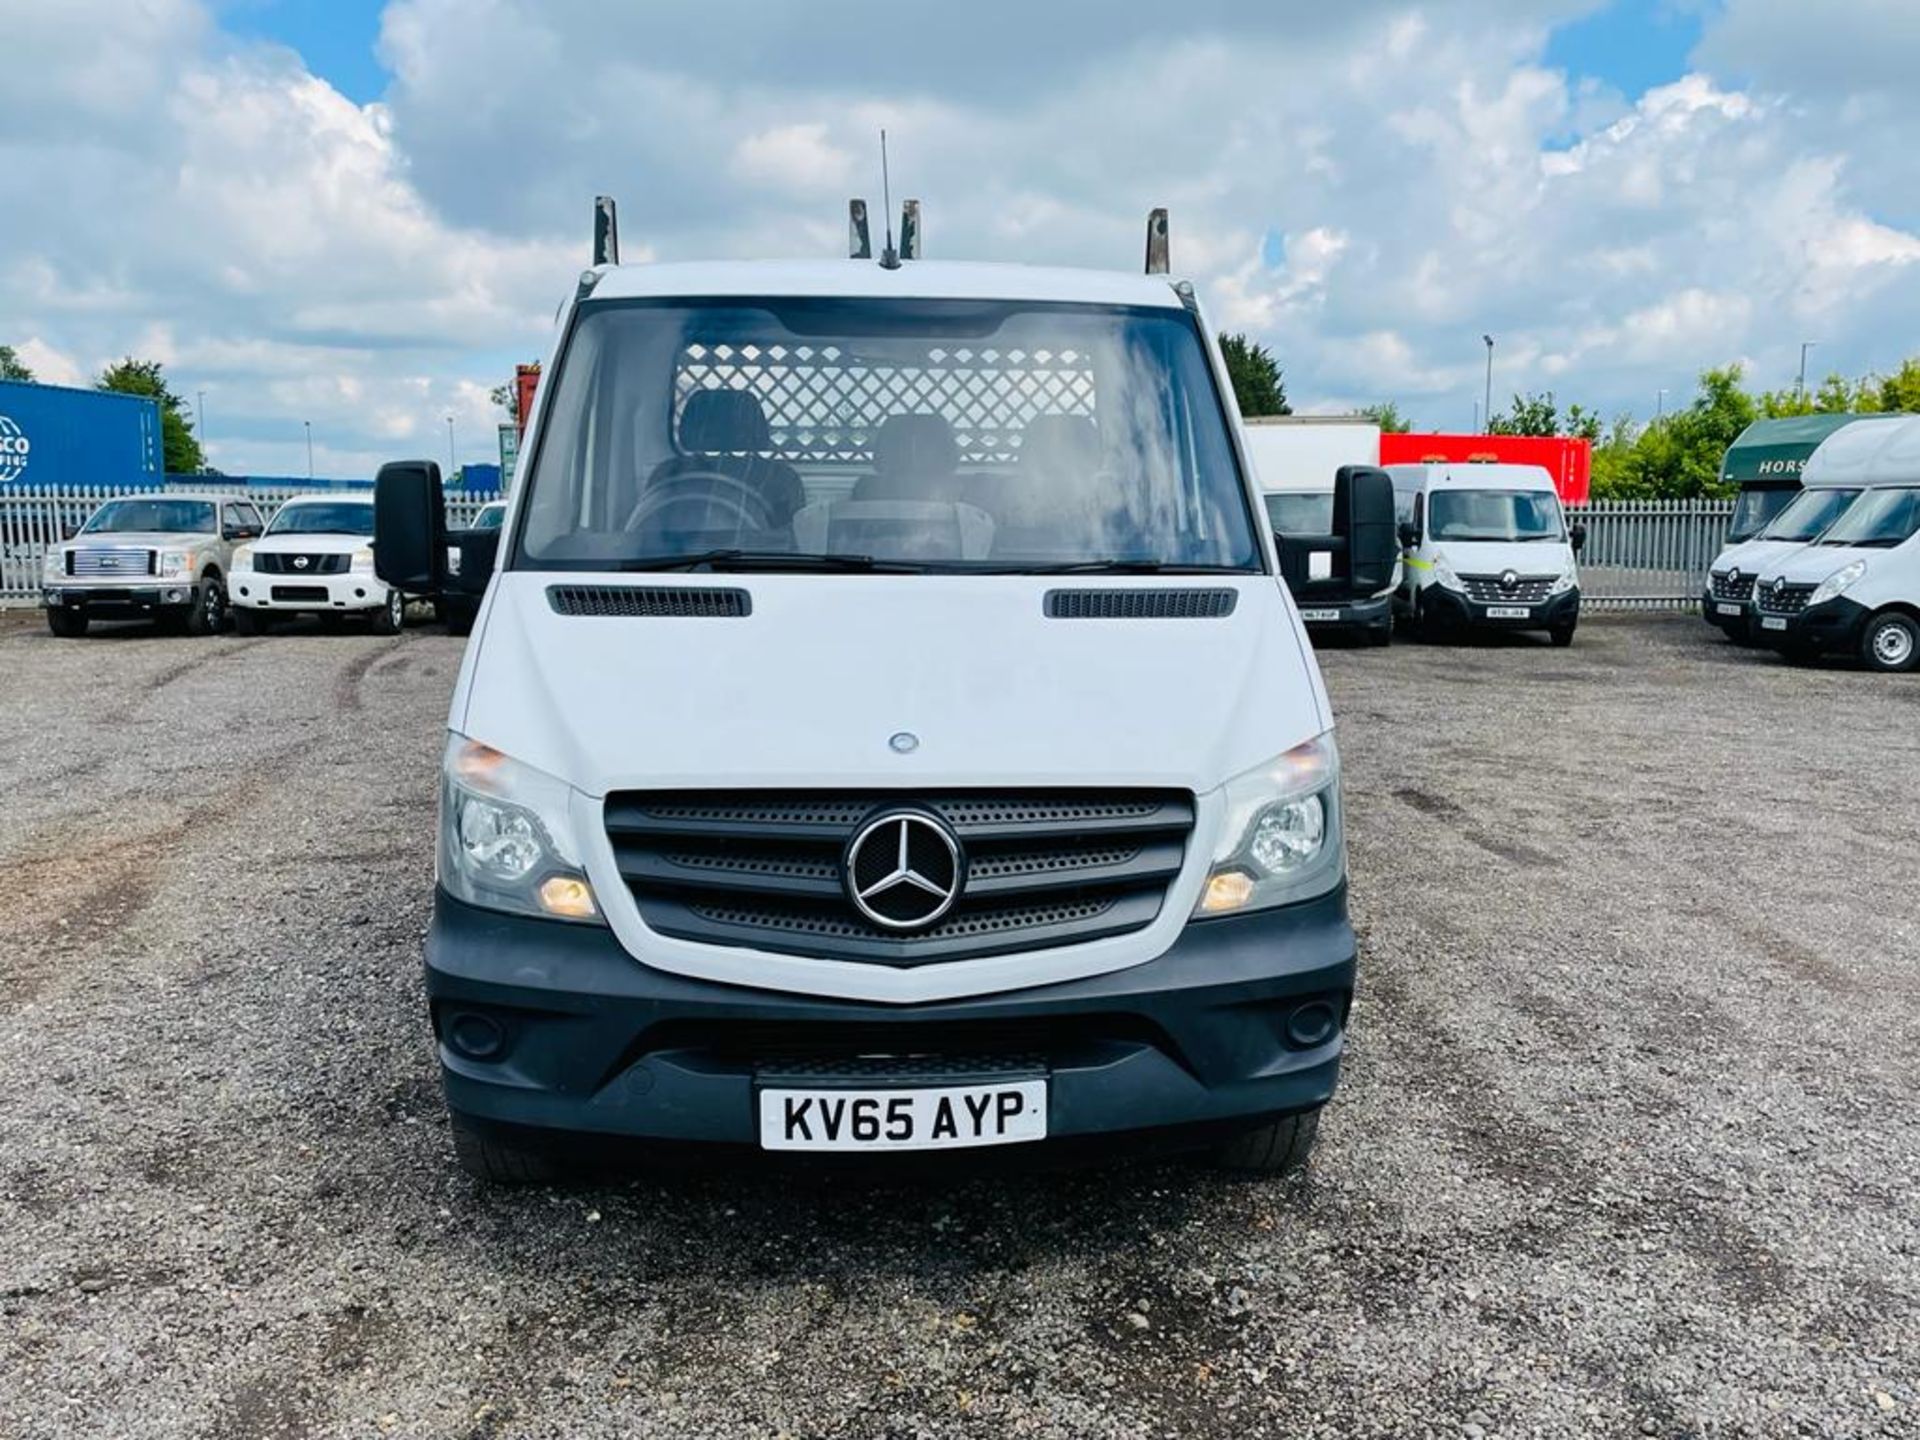 Mercedes Benz Sprinter 2.1 313 CDI L3 Alloy Dropside 2015 '65 Reg' - Cruise Control - Tail Lift - Image 3 of 21